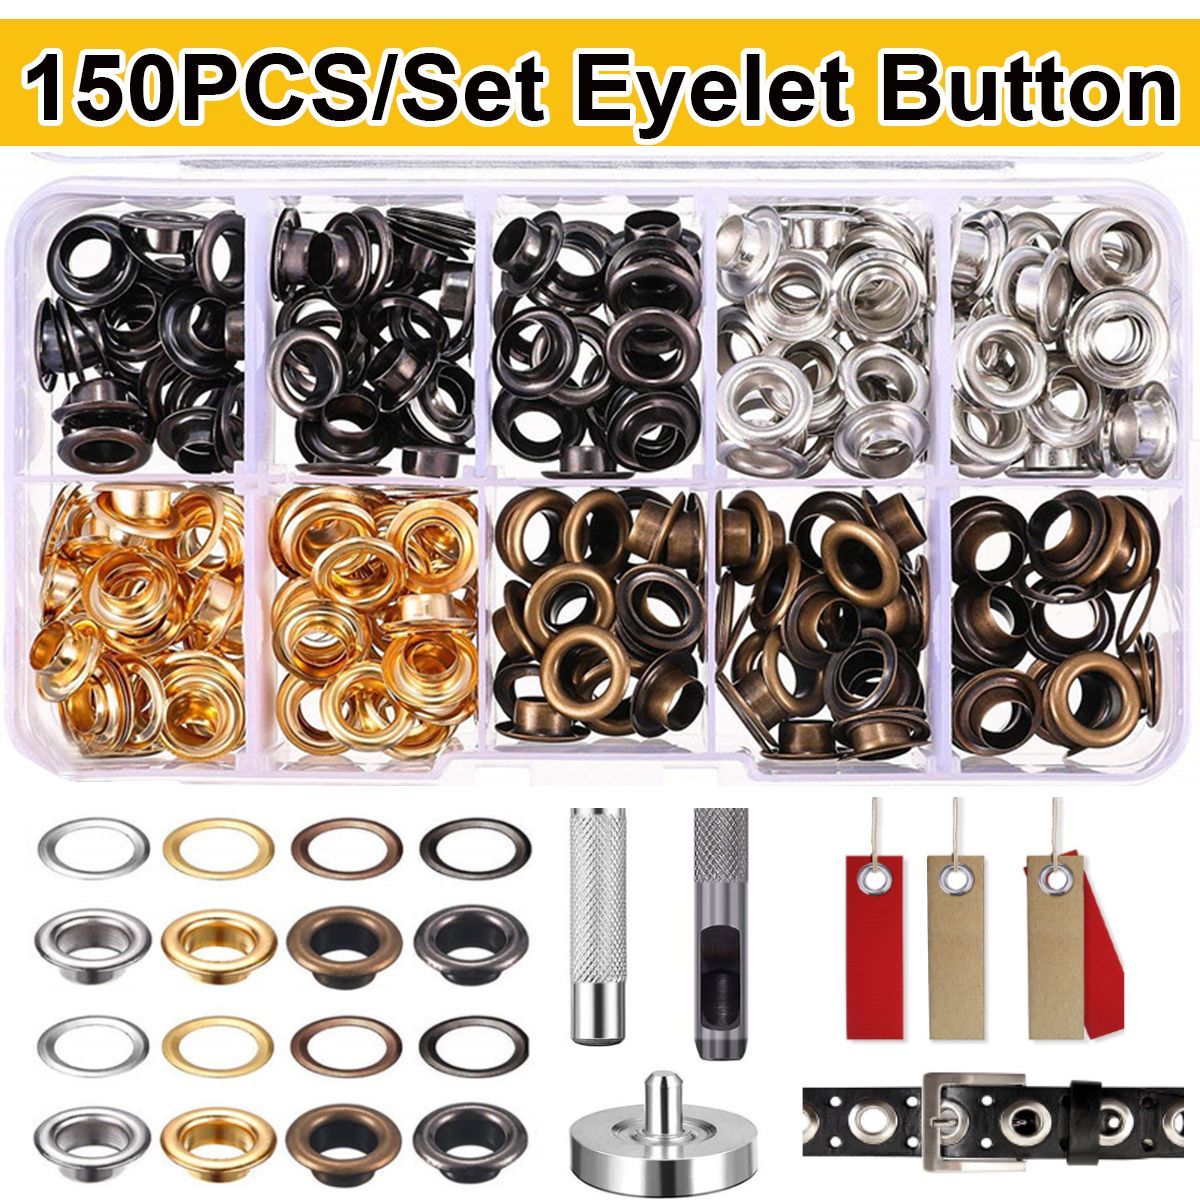 150PCS-Clothing-Luggage-Accessories-Eyelet-Button-Eyelet-Button-DIY-Tool-Kit-Copper-1731520